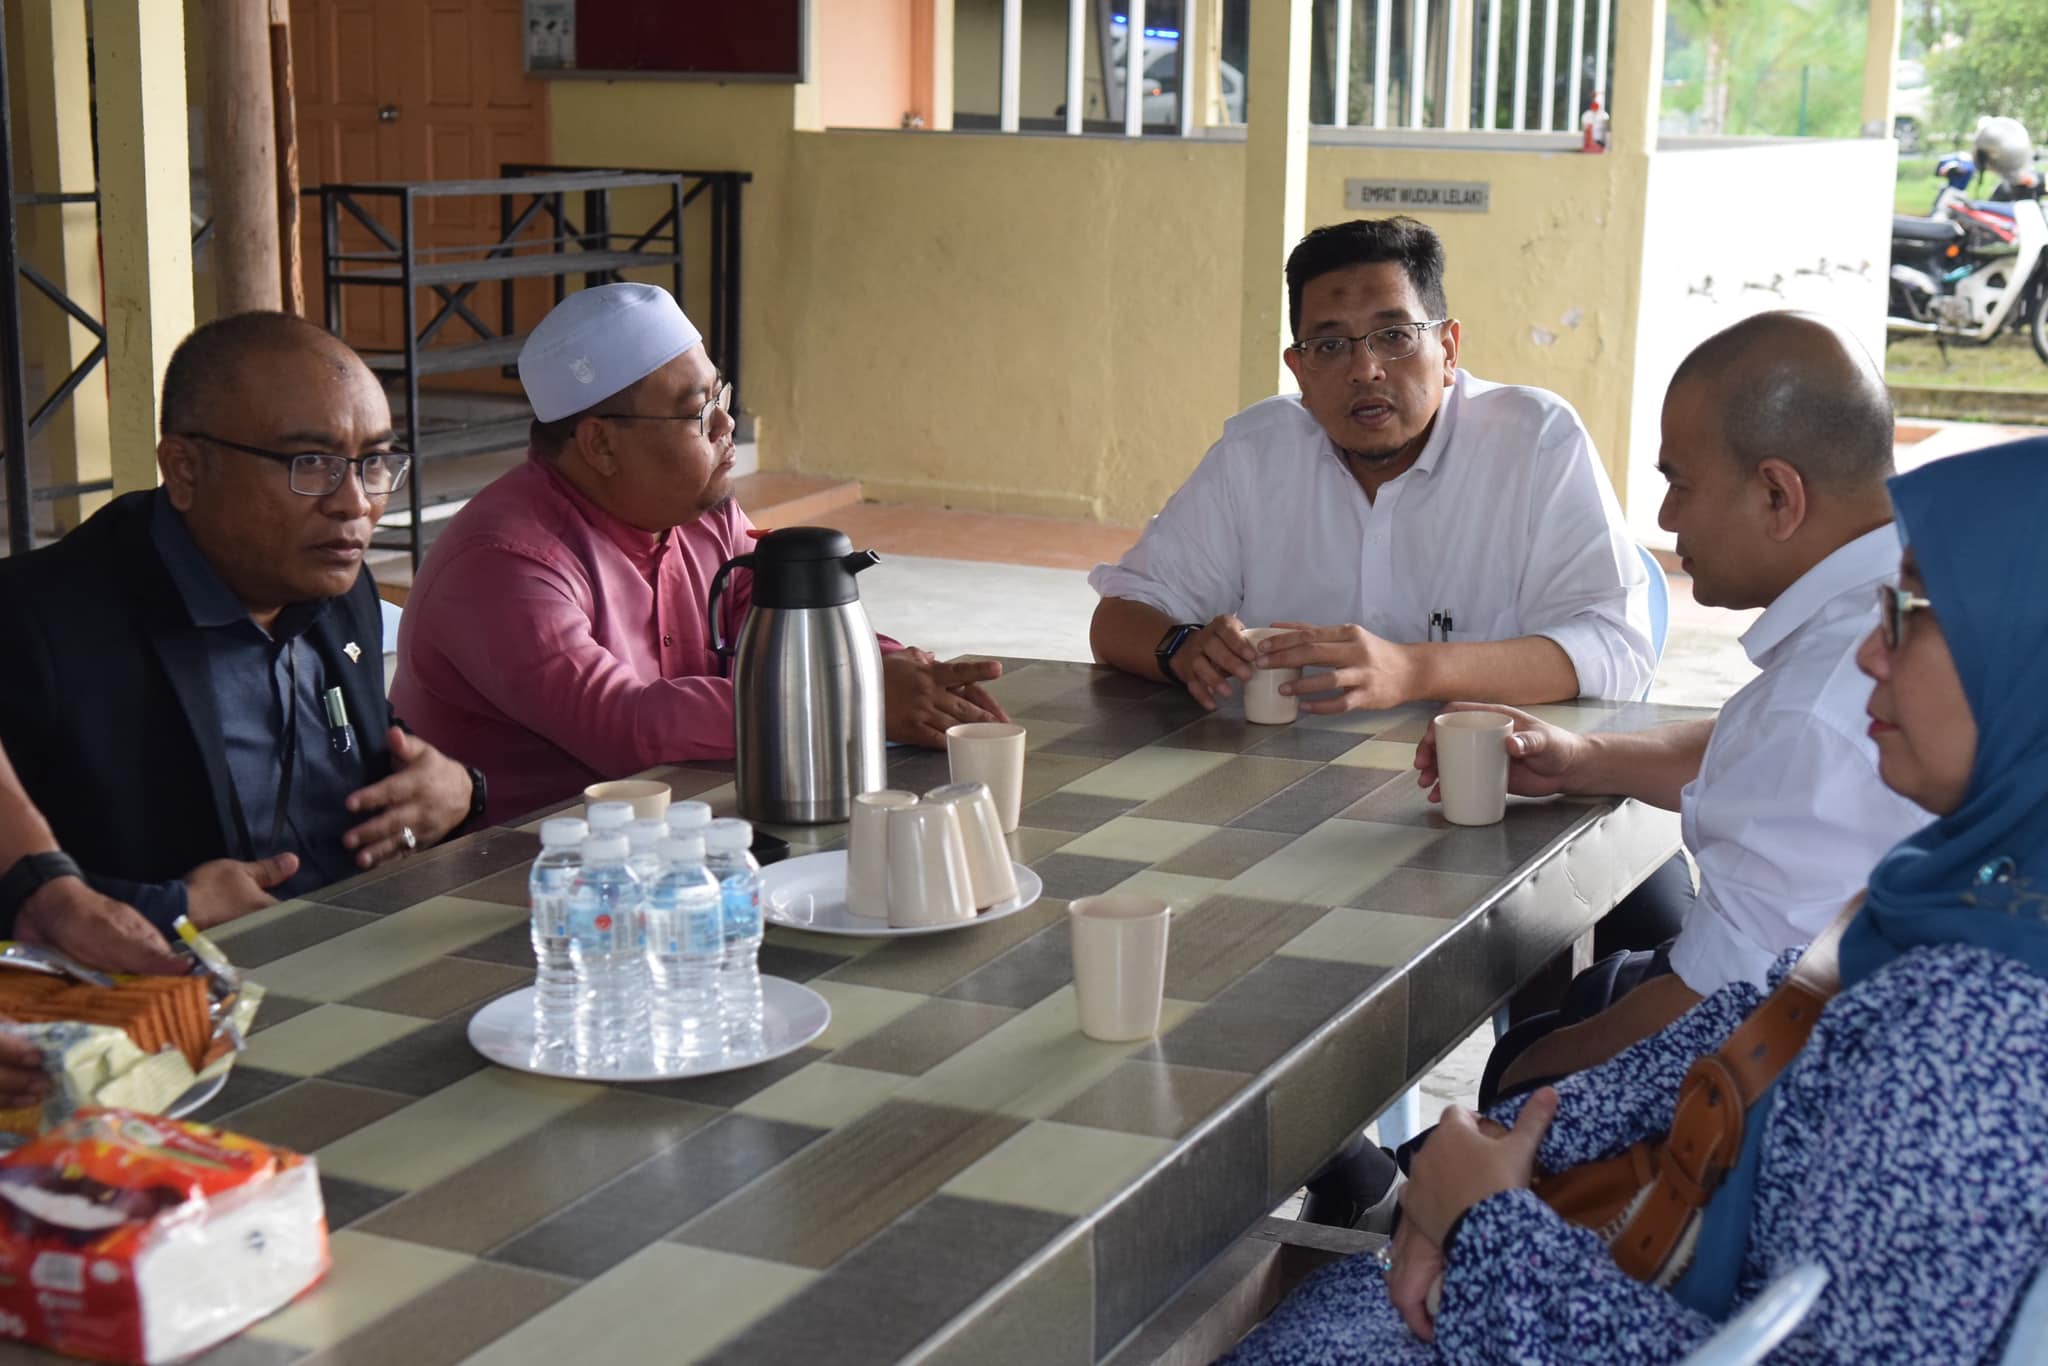 YBhg. Dato' Professor Dr. Ahmad Farhan Mohd Sadullah, the 10th Vice Chancellor of Universiti Putra Malaysia visited areas around campus on his first day.